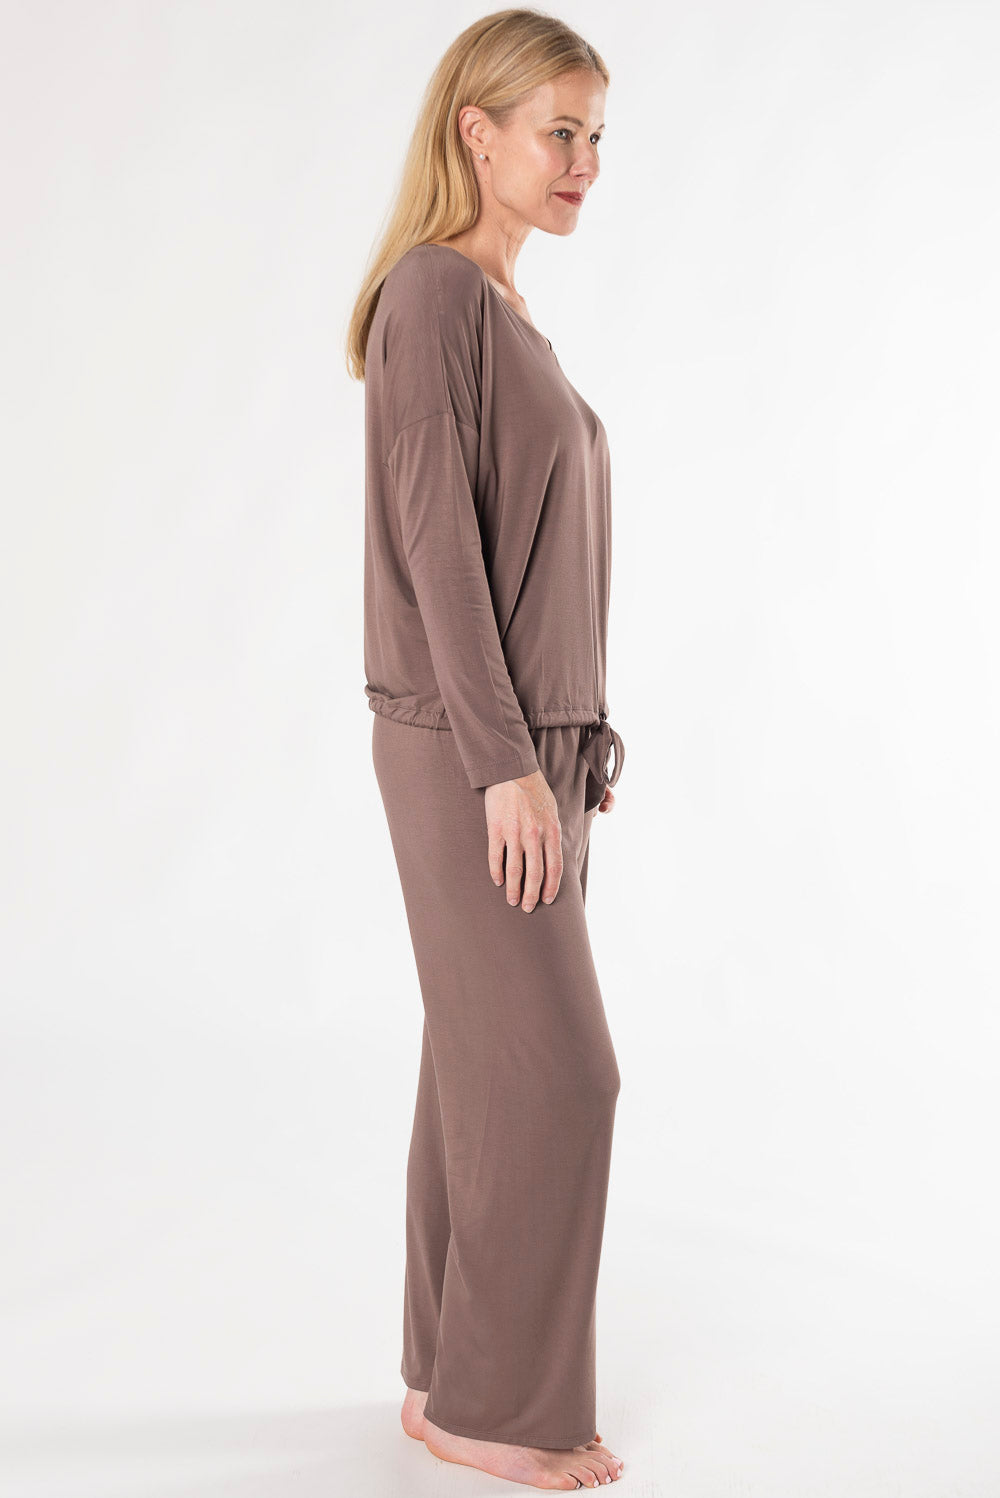 Bamboo two piece v-neck lounge set with straight leg pant - brown